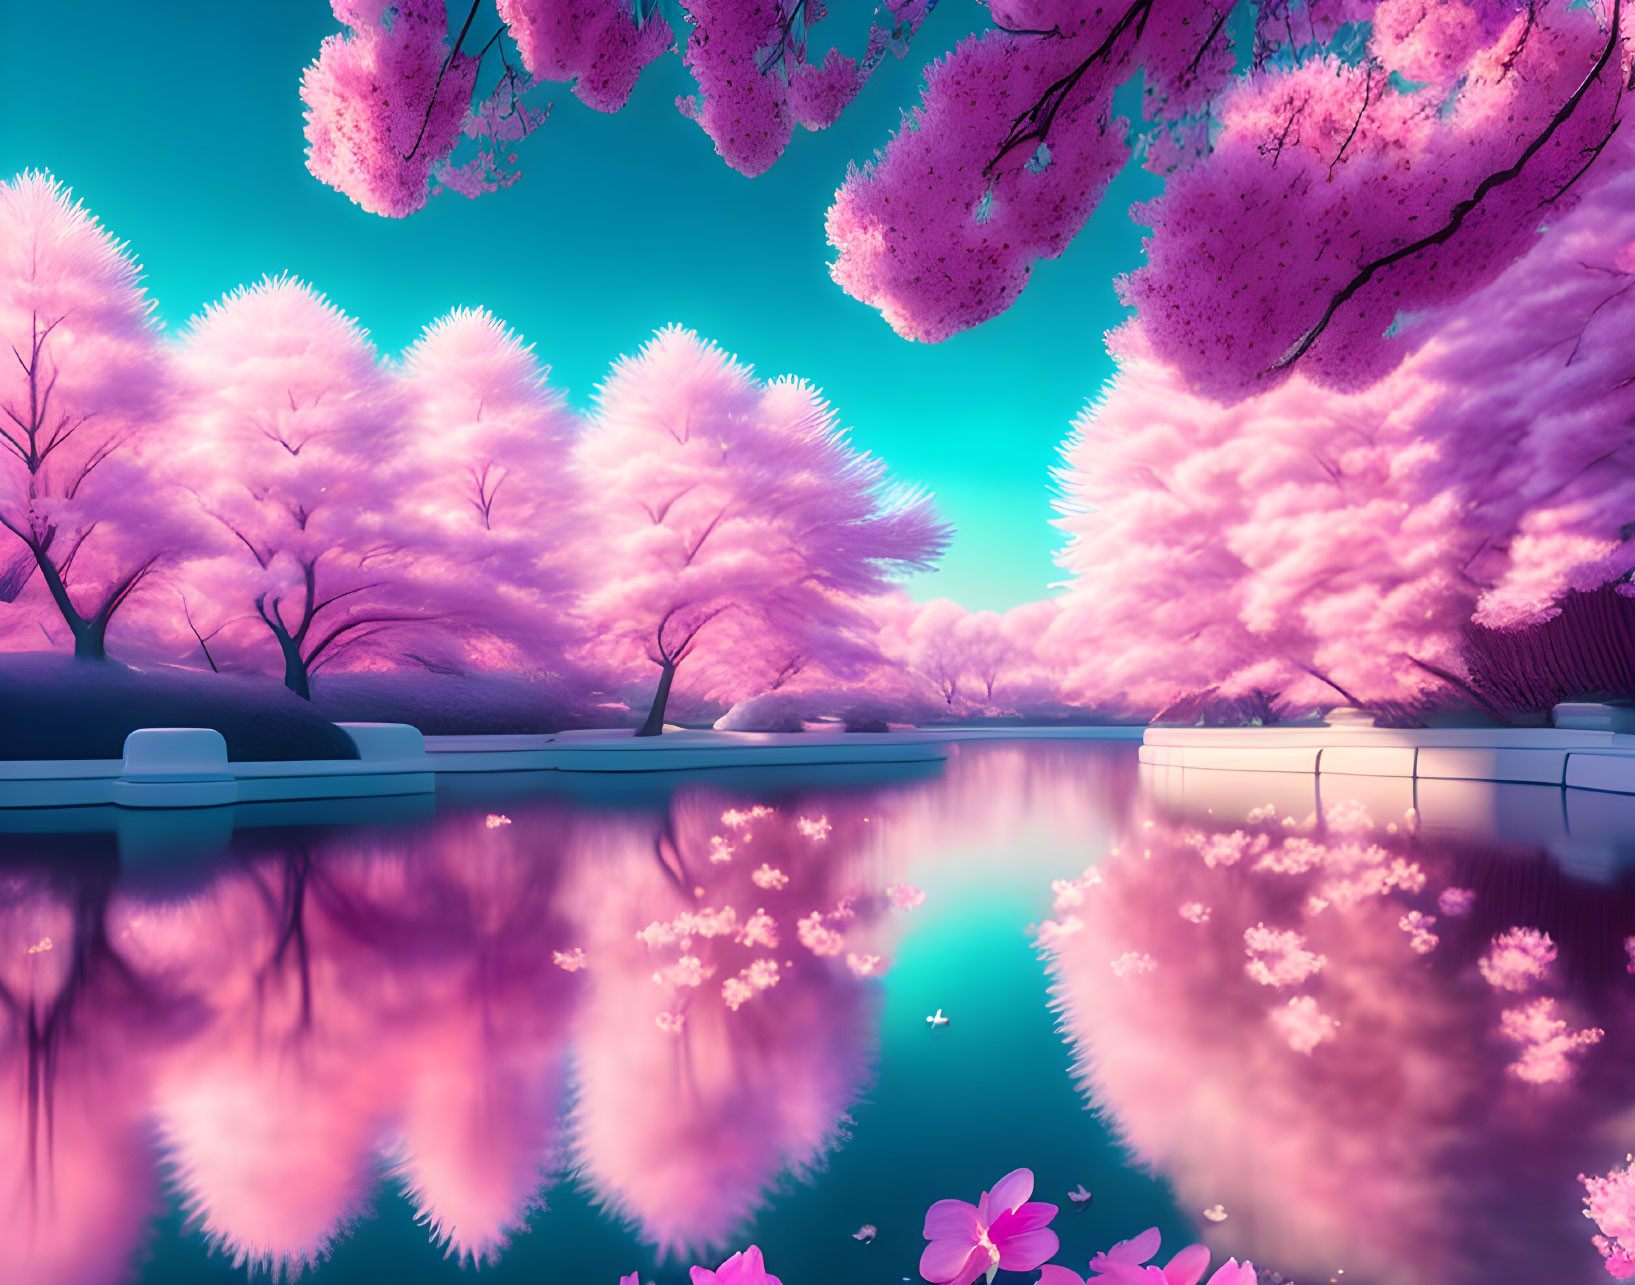 Pink cherry blossoms by tranquil lake under purple sky